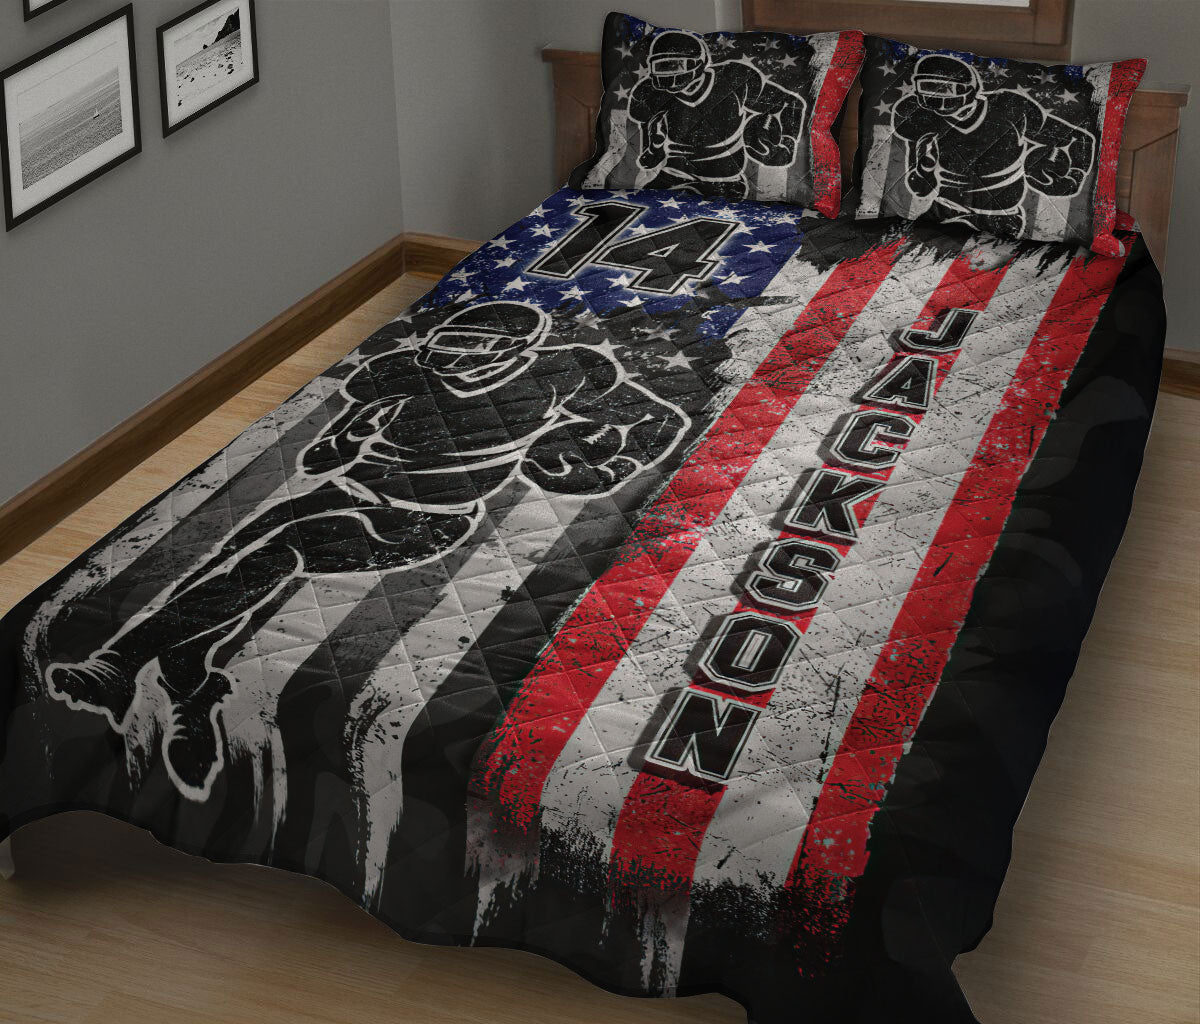 Ohaprints-Quilt-Bed-Set-Pillowcase-Football-Old-Flag-Usa-American-Fullblack-Custom-Personalized-Name-Number-Blanket-Bedspread-Bedding-326-King (90'' x 100'')